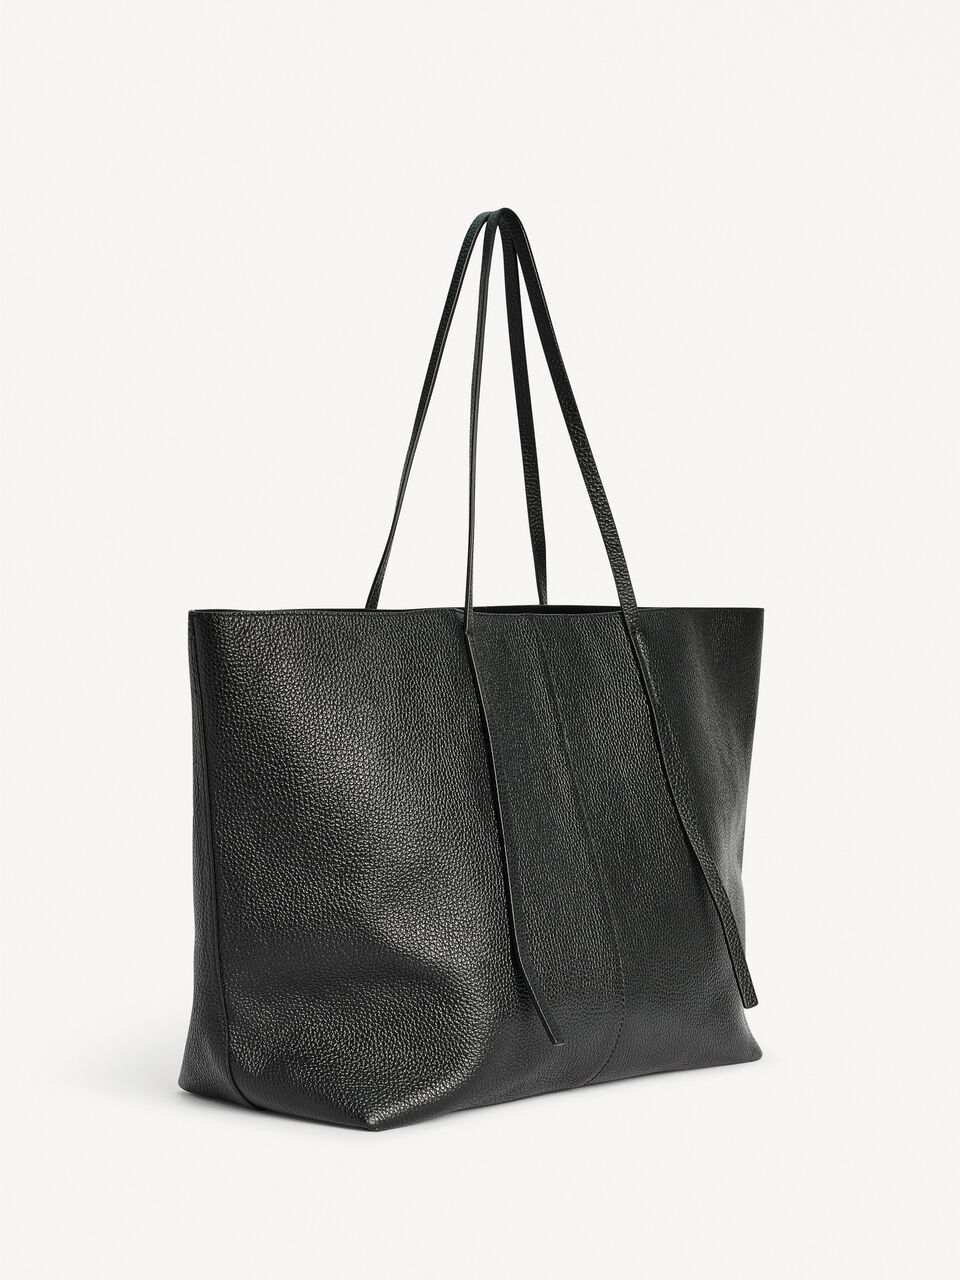 Abilla leather tote - Buy online